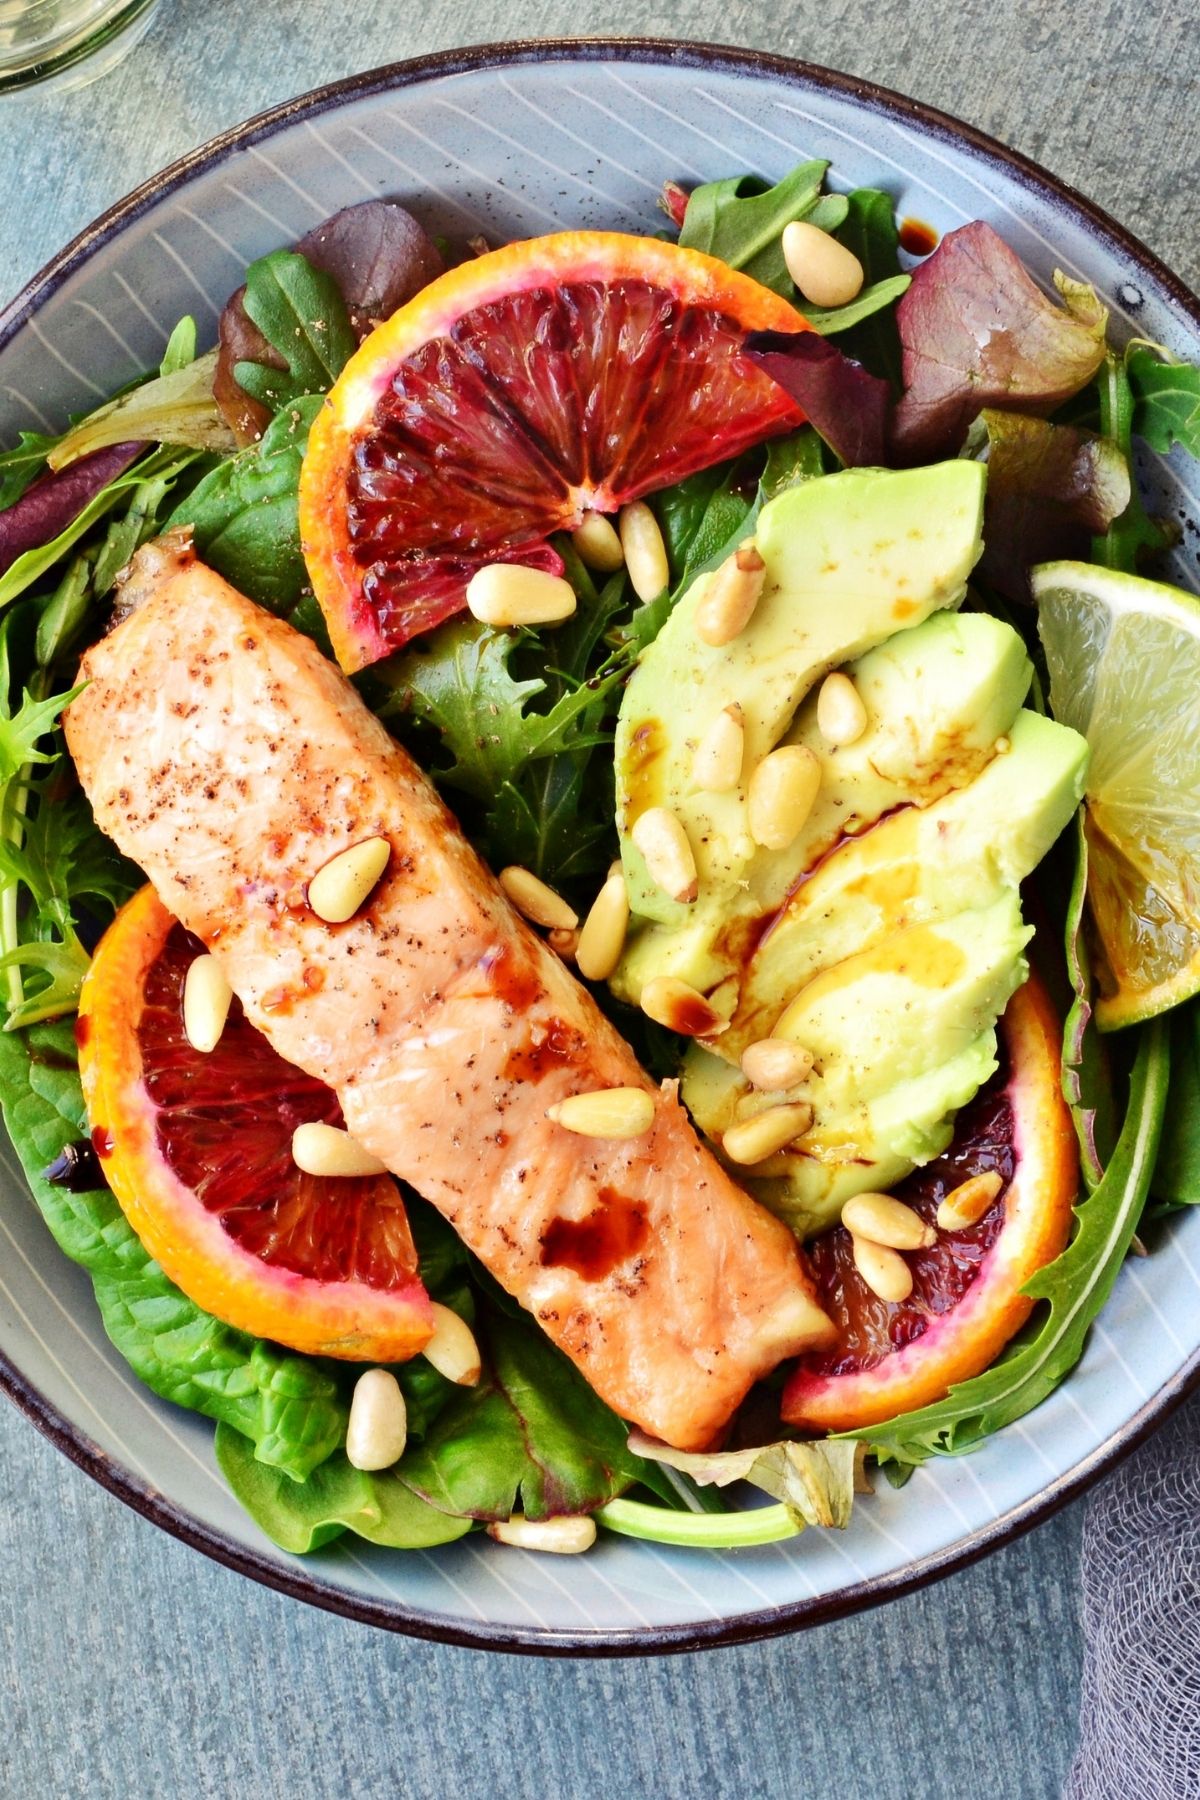 paleo meal with fruit, fish, avocado, and nuts